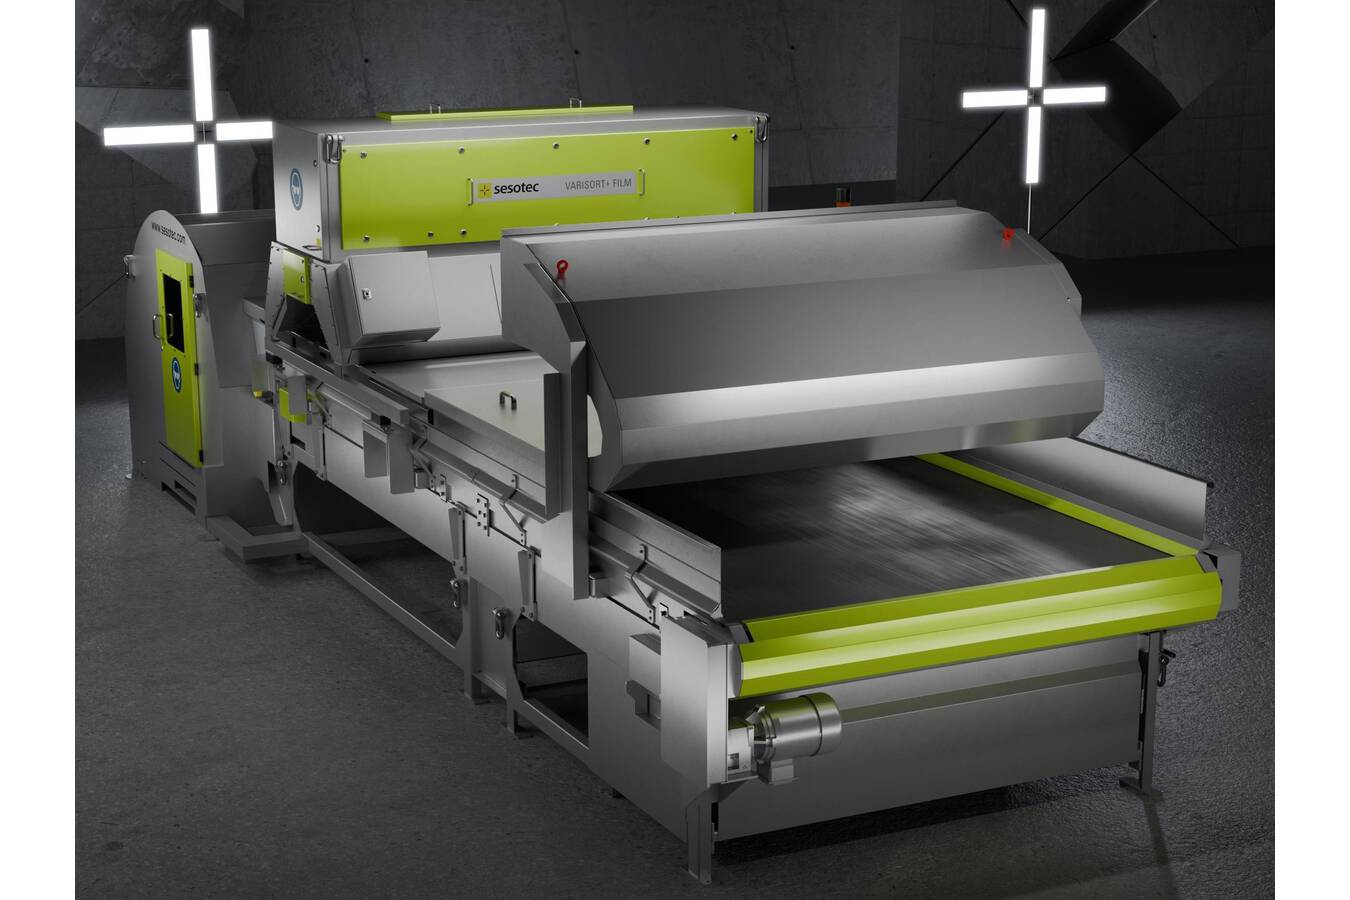 At IFAT 2024, Sesotec will be presenting the VARISORT+ FILM film sorter, a modular system based on the proven features of the VARISORT+ device family (Rendering: Sesotec GmbH) 